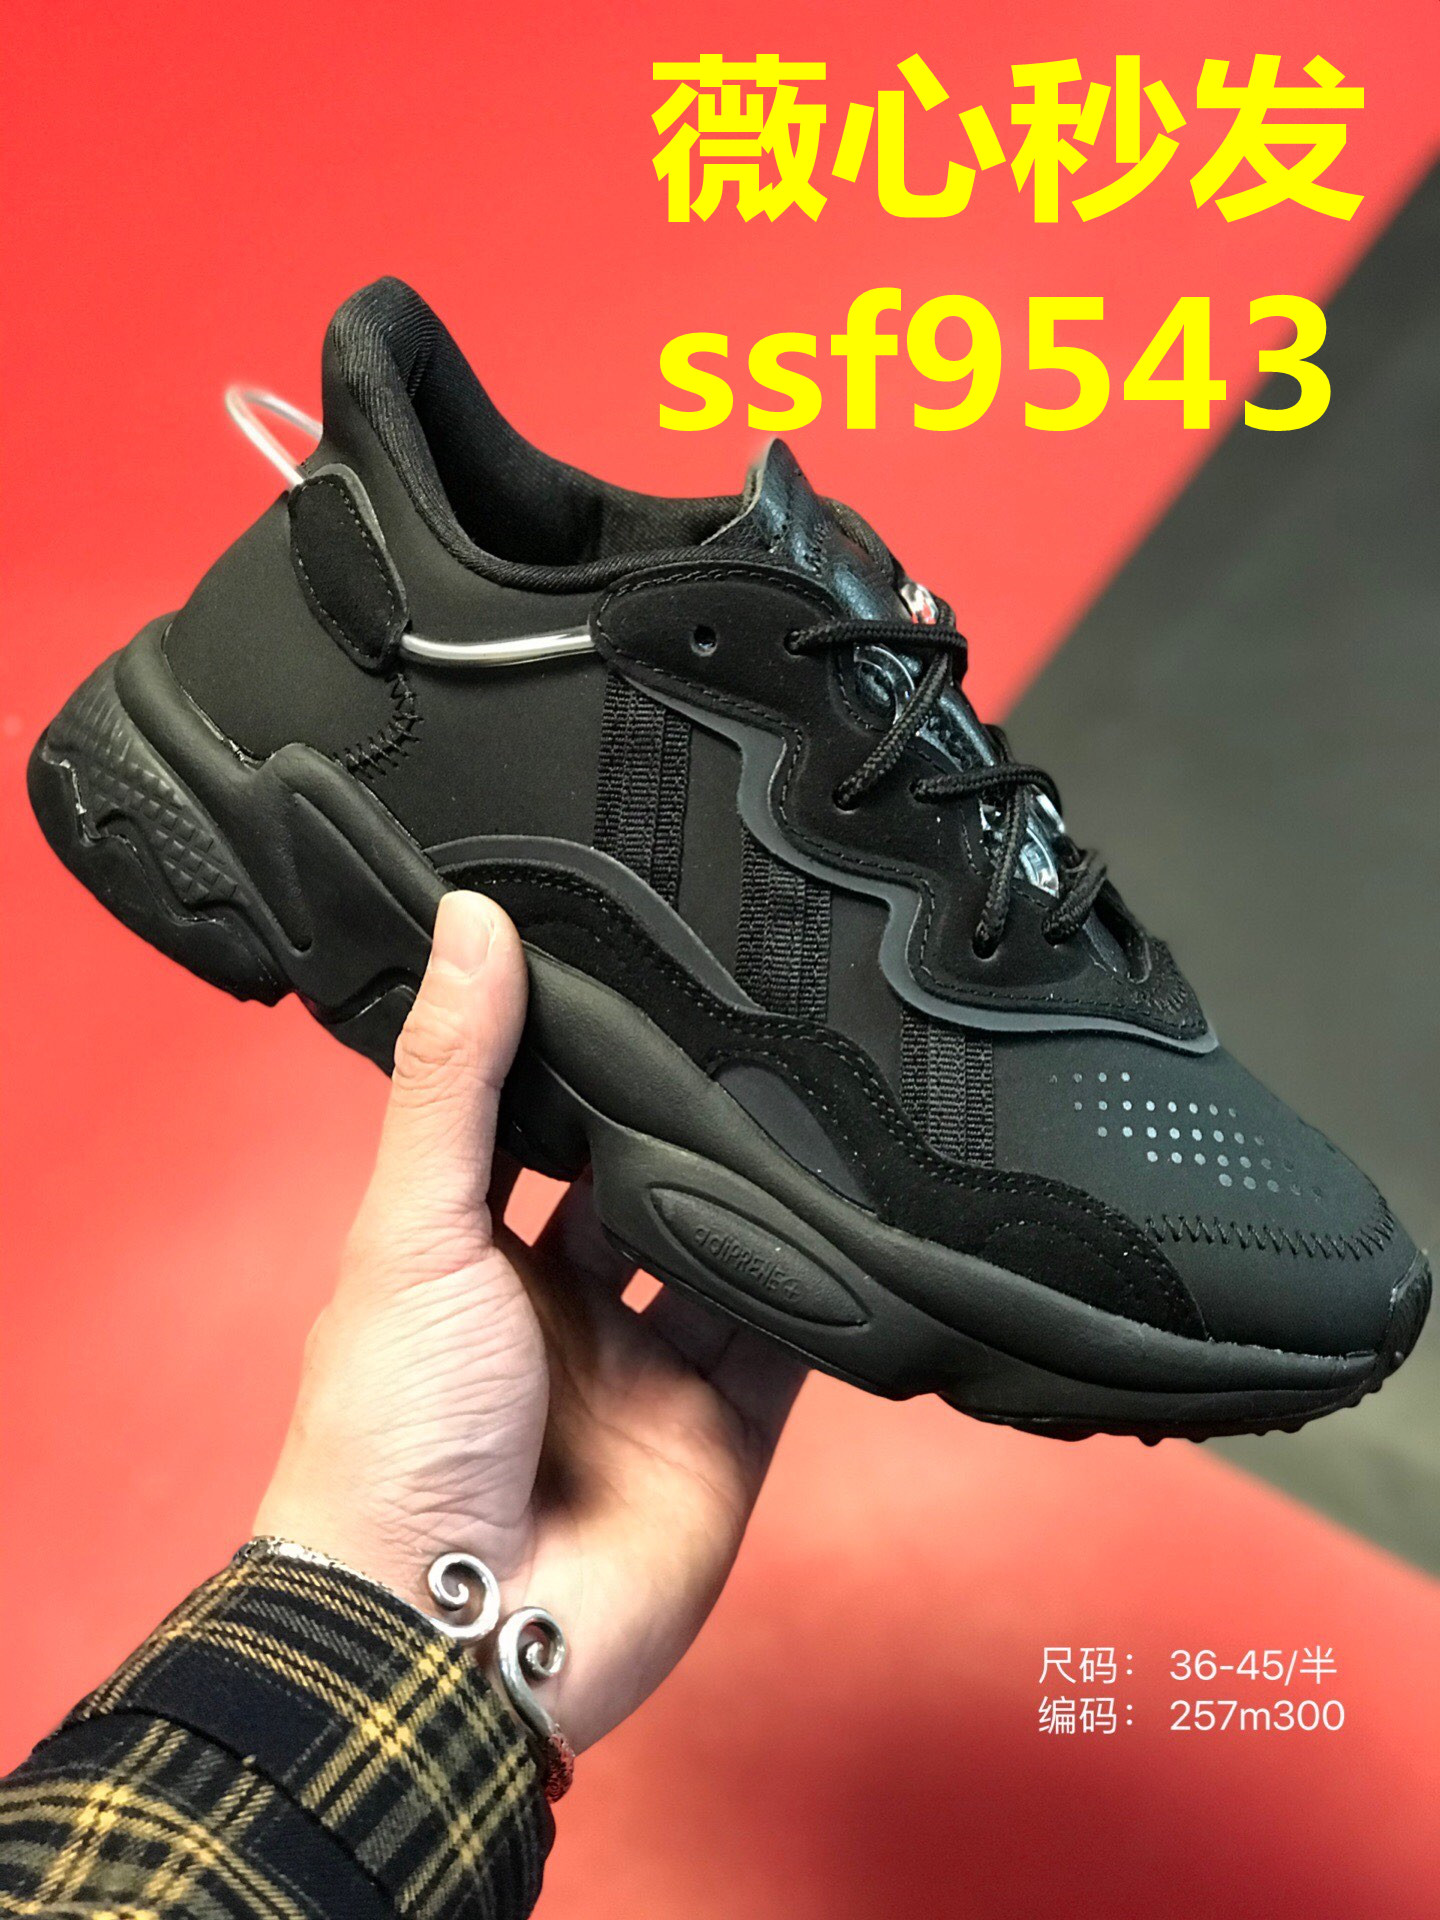 Dark Grey2020 winter new pattern Olive green Men's Shoes Women's Shoes Star of the same style black and white Mesh surface Casual shoes Low Gang non-slip Rain shoes